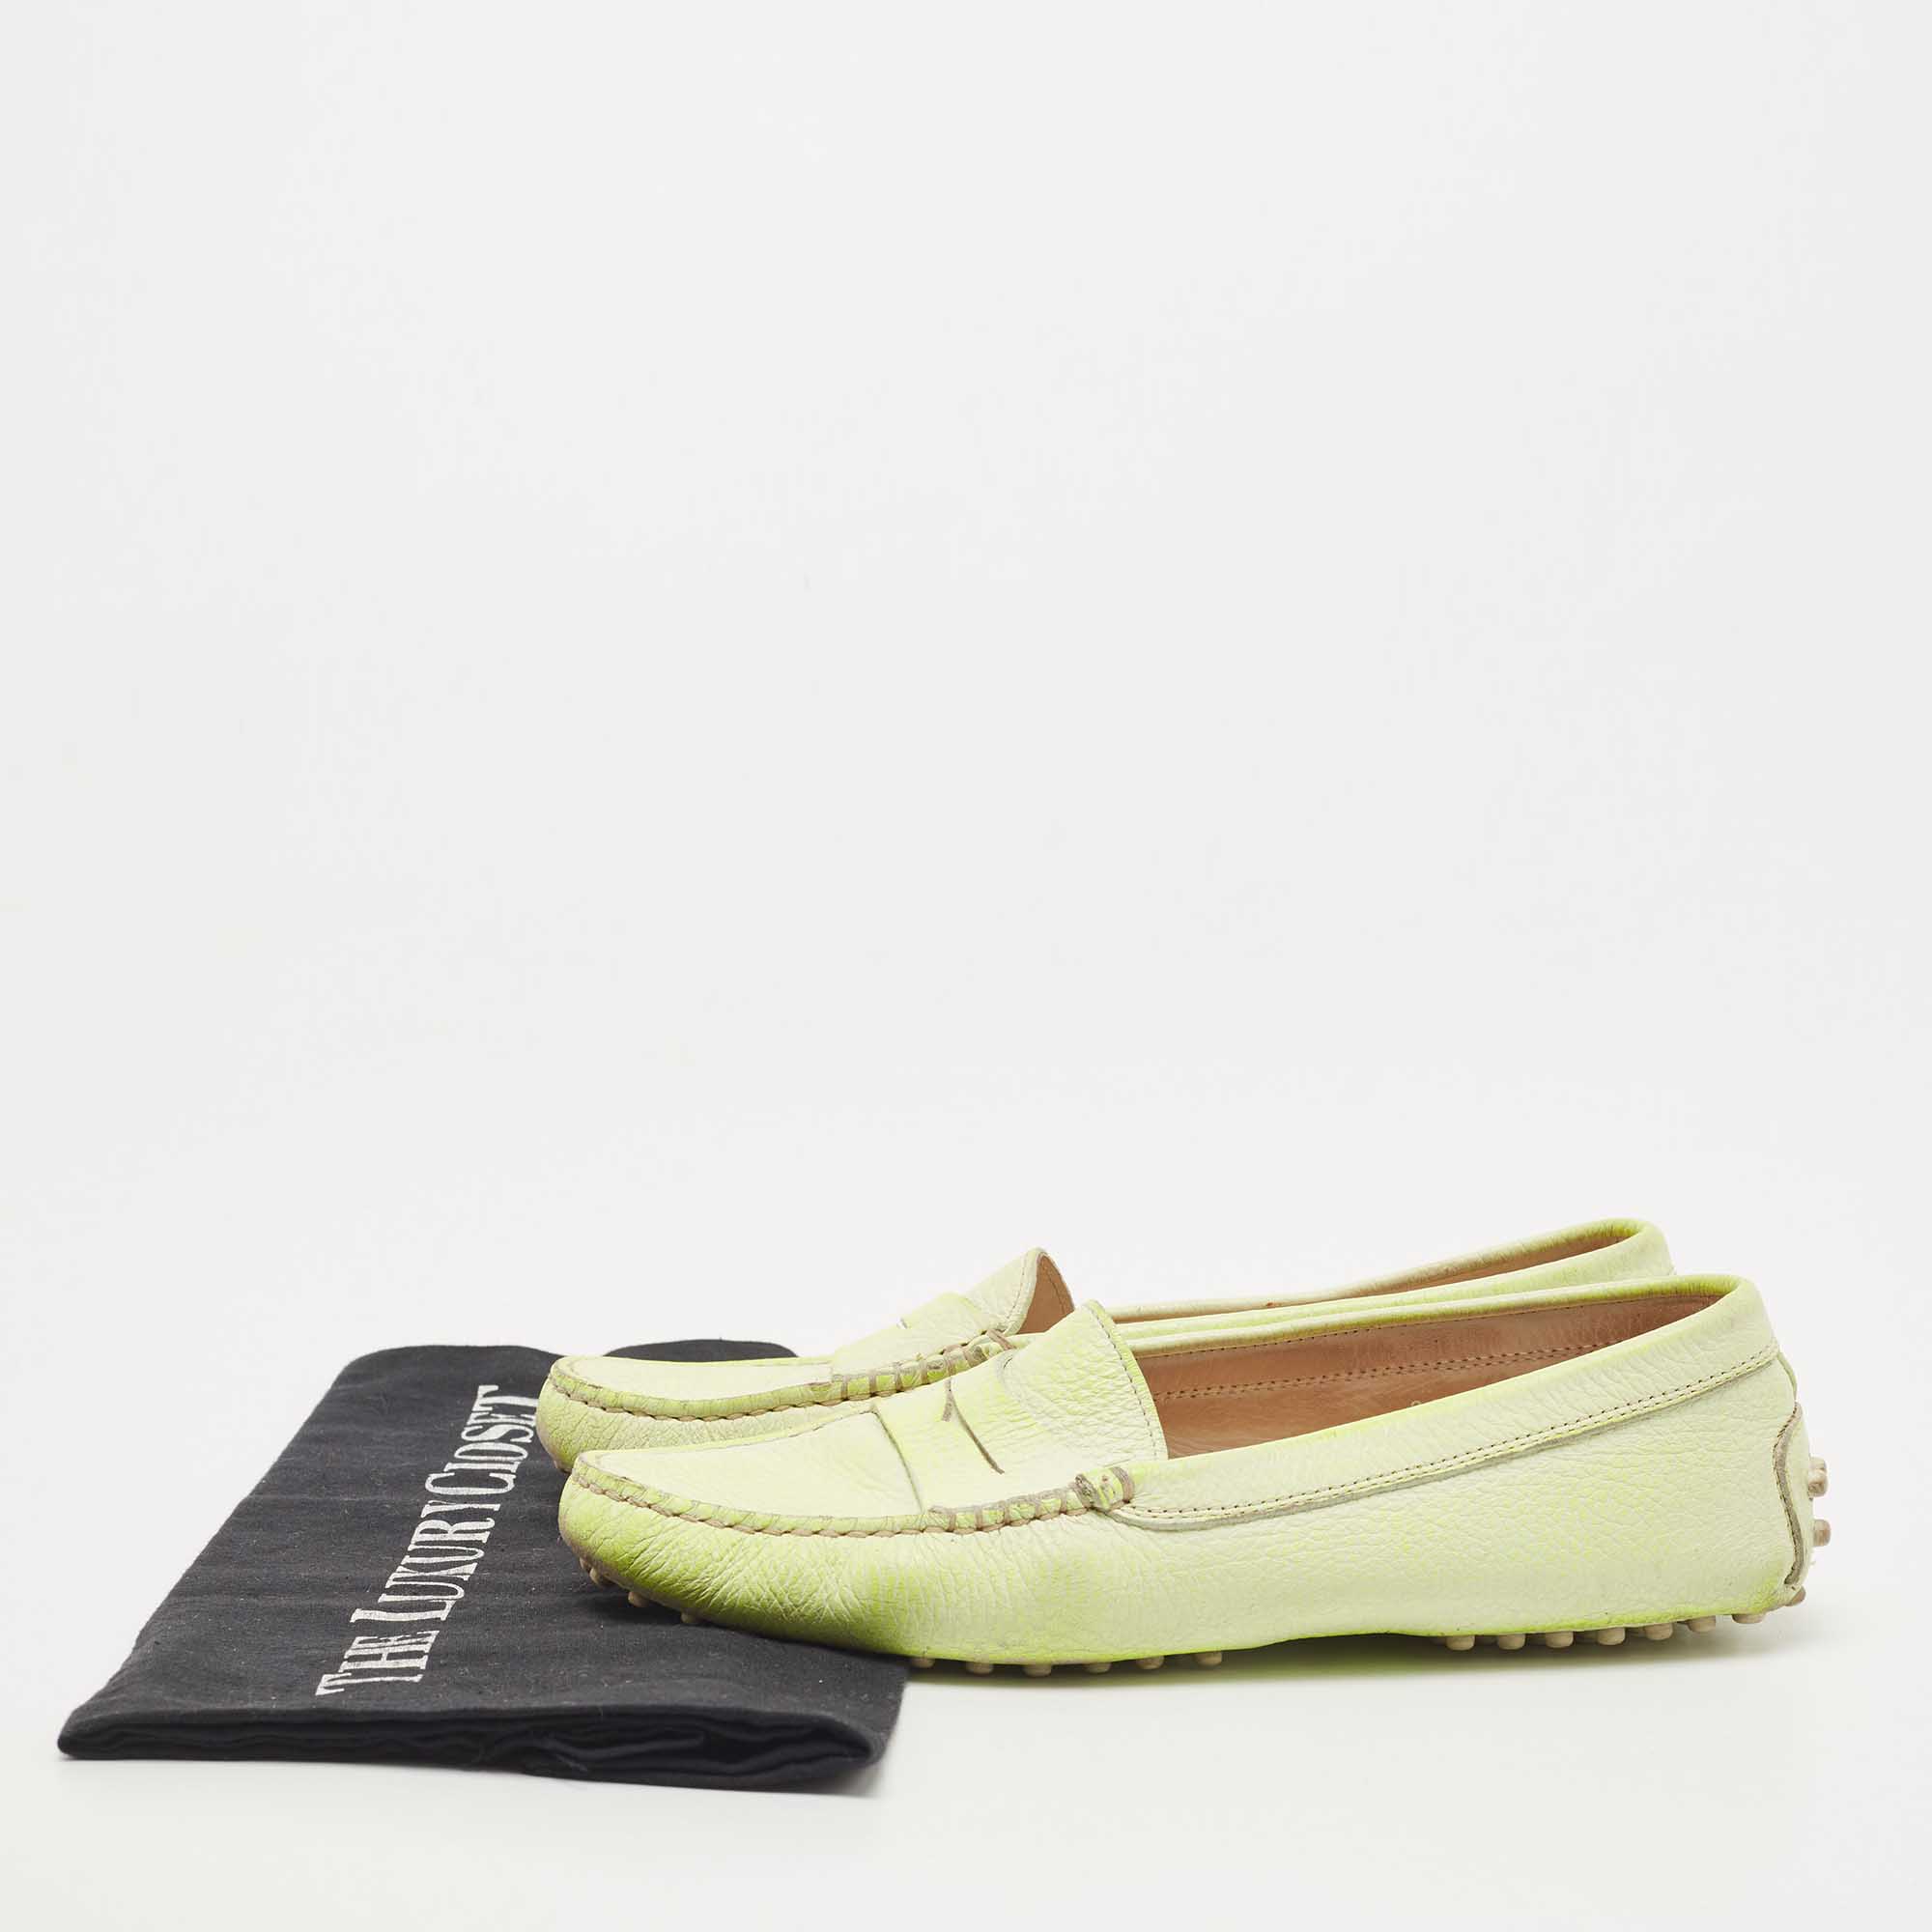 Tod's Neon Two Tone Leather Penny Slip On Loafers Size 36